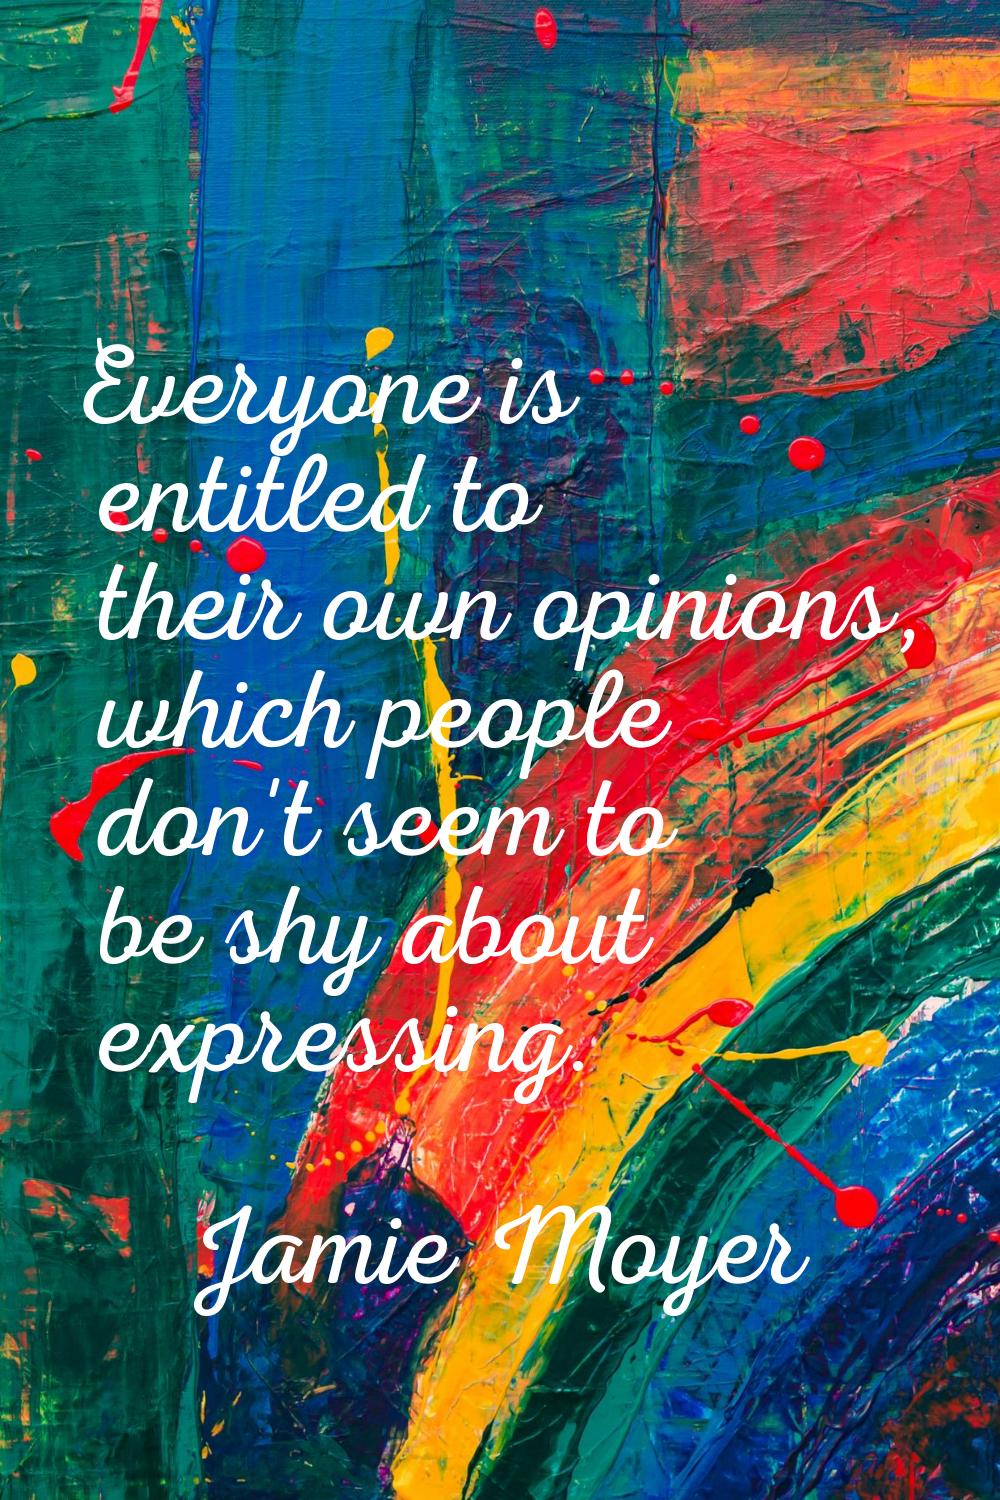 Everyone is entitled to their own opinions, which people don't seem to be shy about expressing.